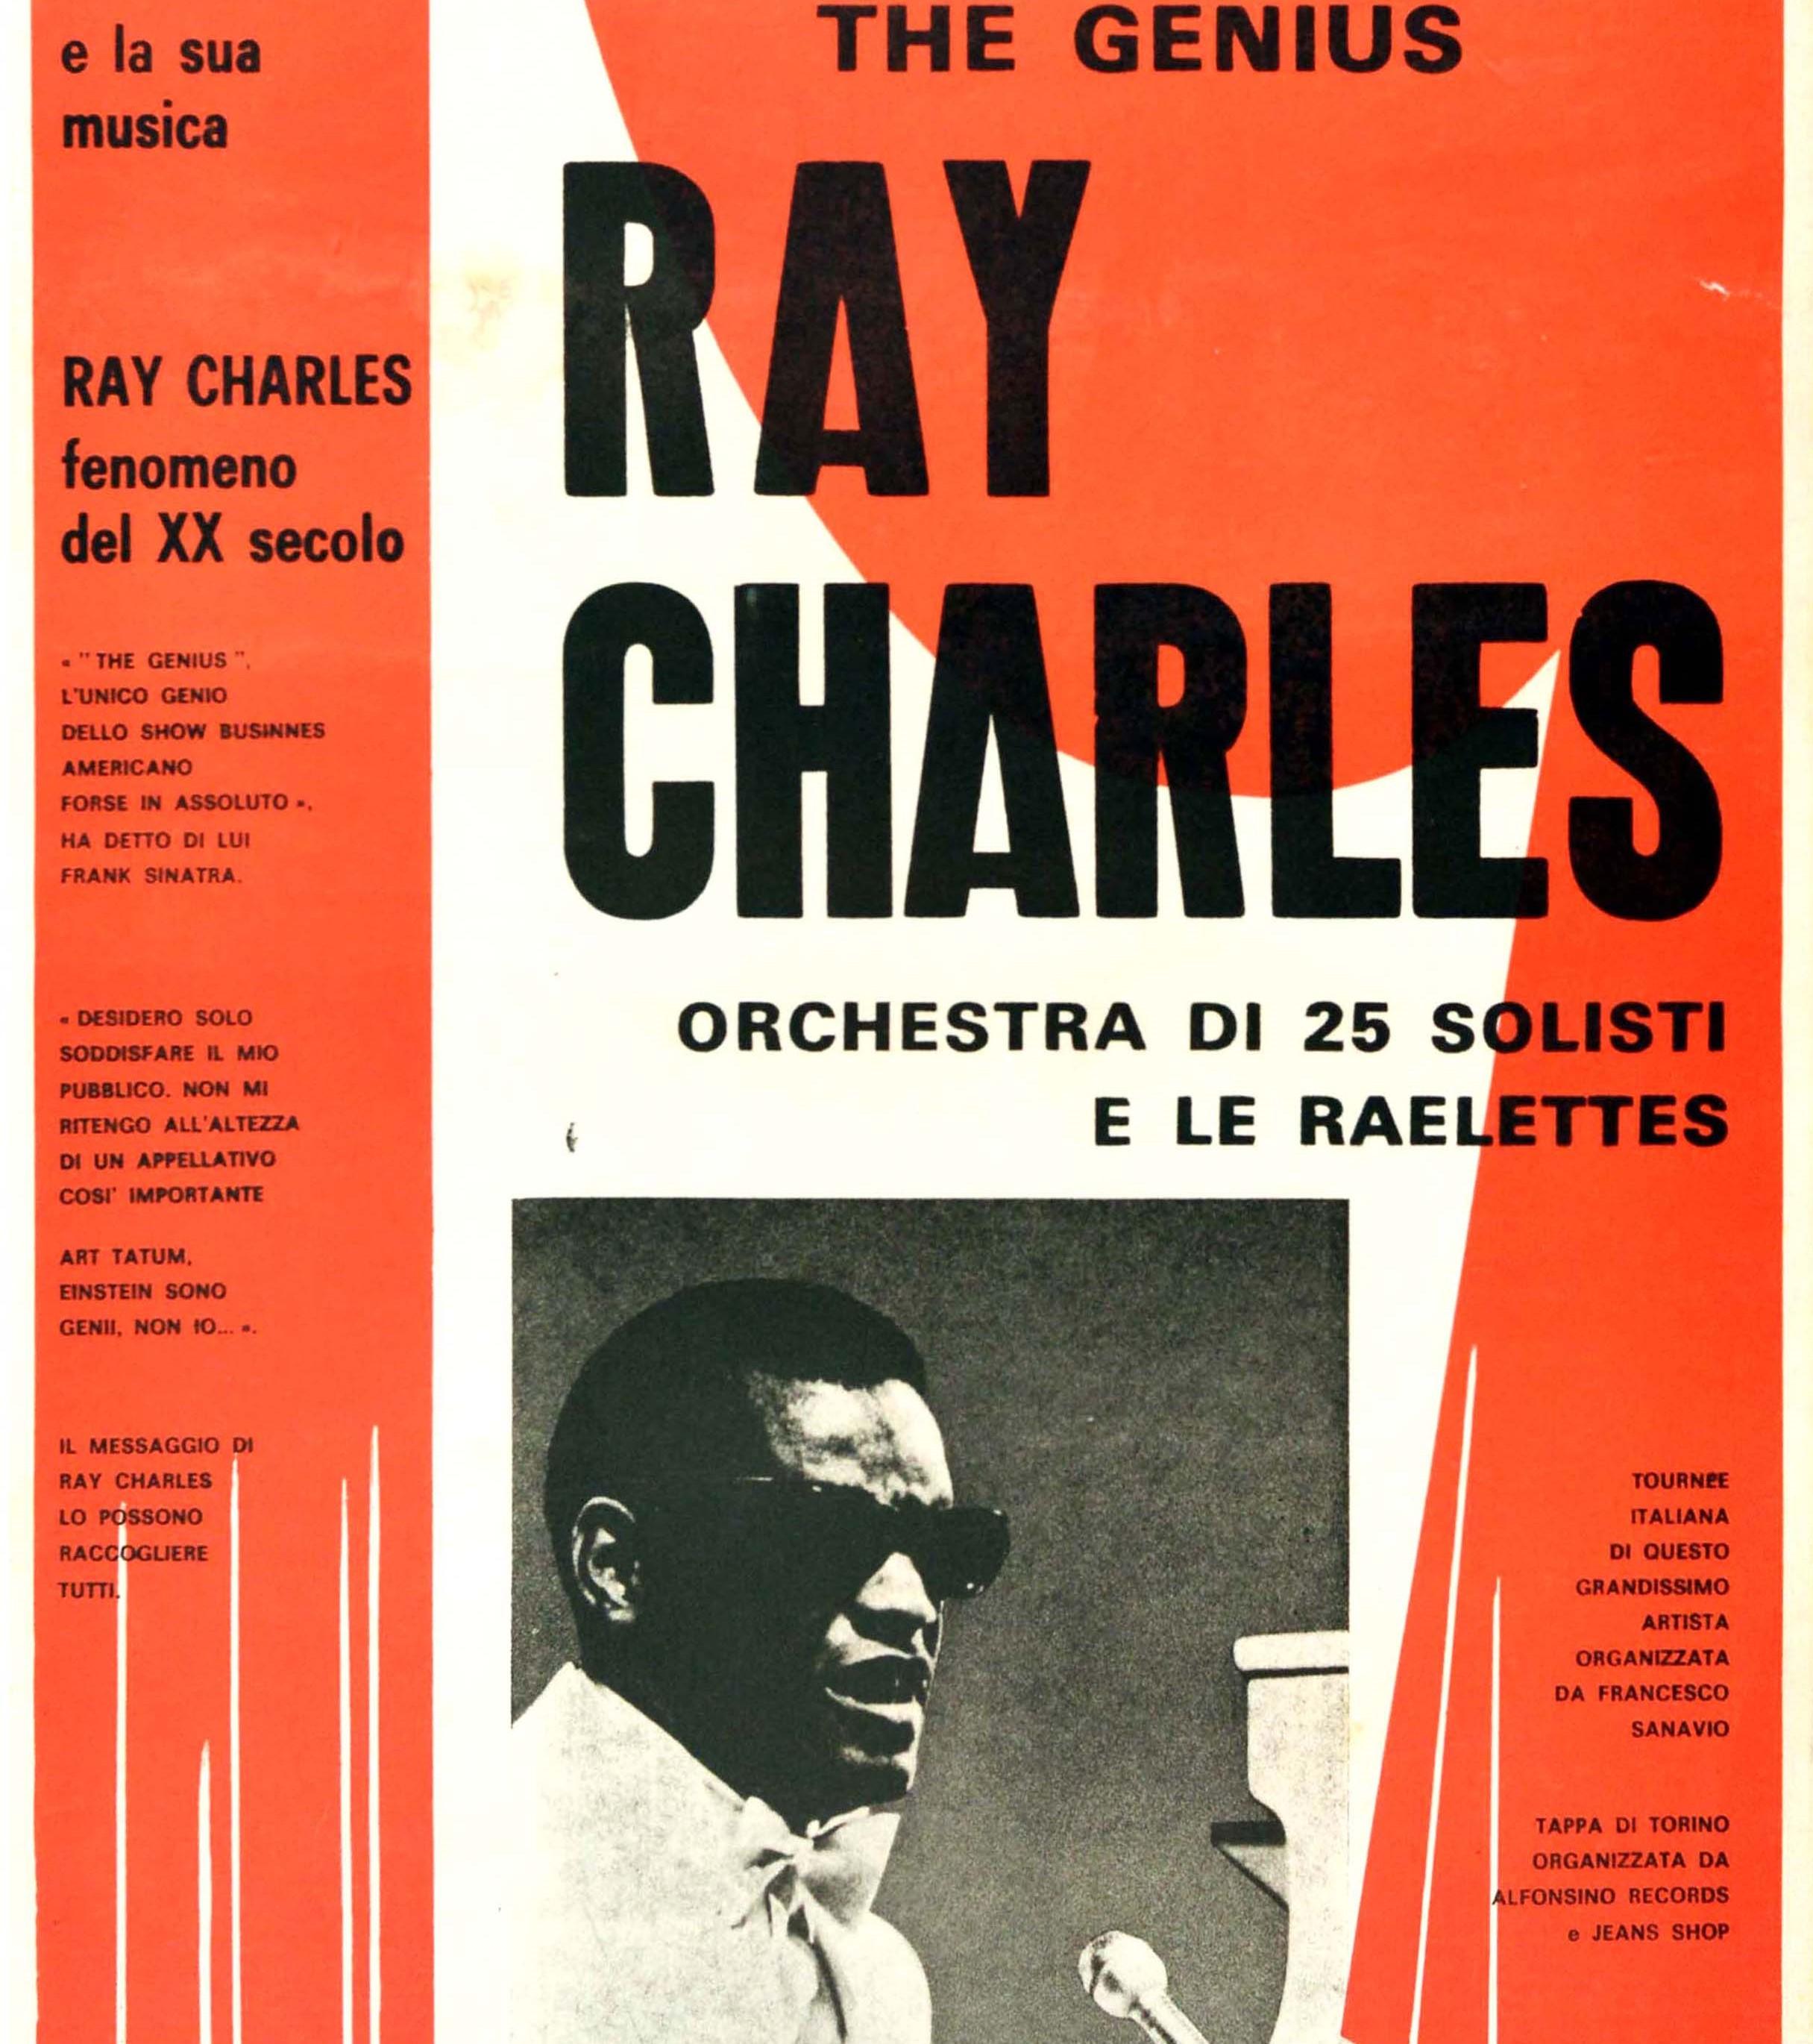 ray charles posters